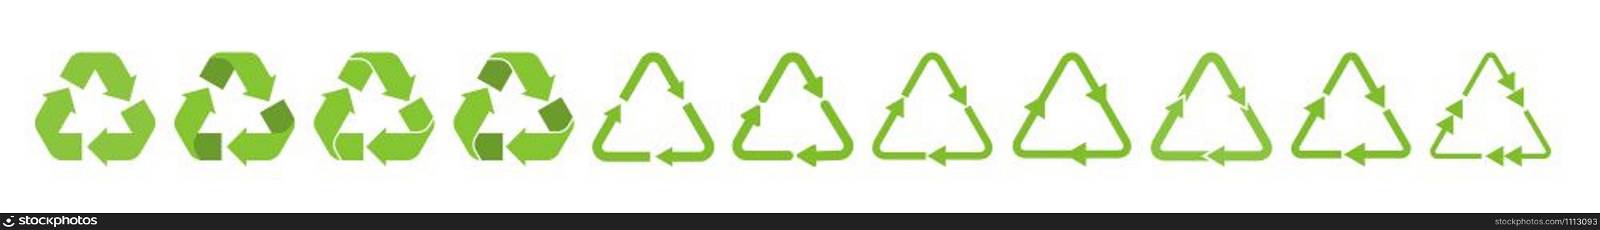 Recycle triangle arrow symbols set vector illustration. Green solid pictograms of reuse or recycling process, arrow cycle in triangle shape isolated on white background for enviromental infographic. Solid green recycle triangle arrow symbols set